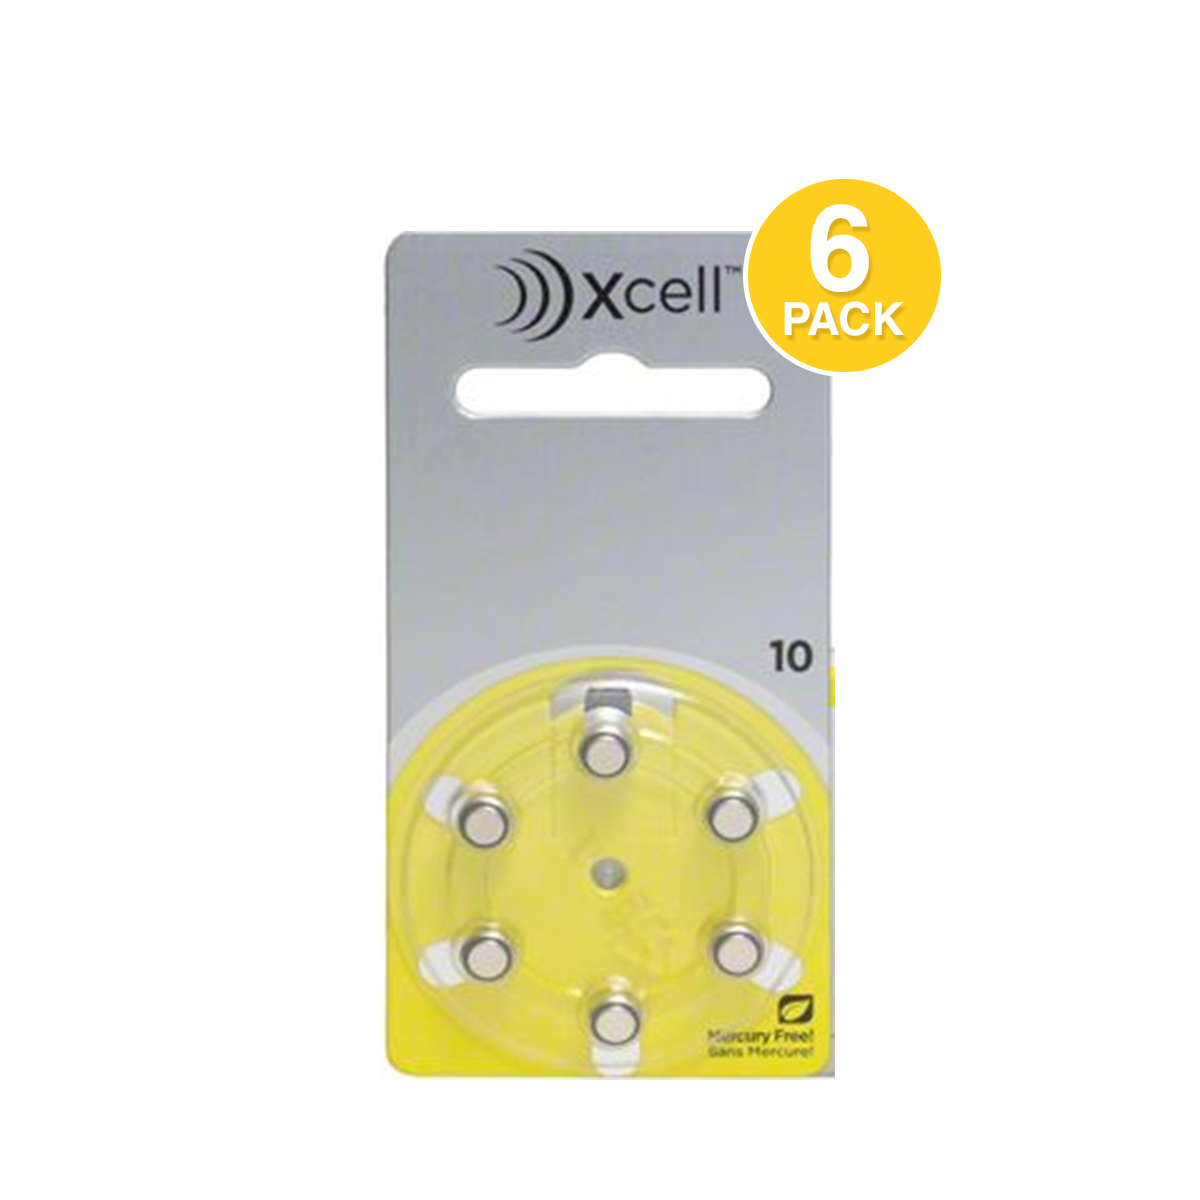 Xcell (Made by Rayovac) Size 10 Hearing Aid Battery (6 pcs) (Mercury Free)